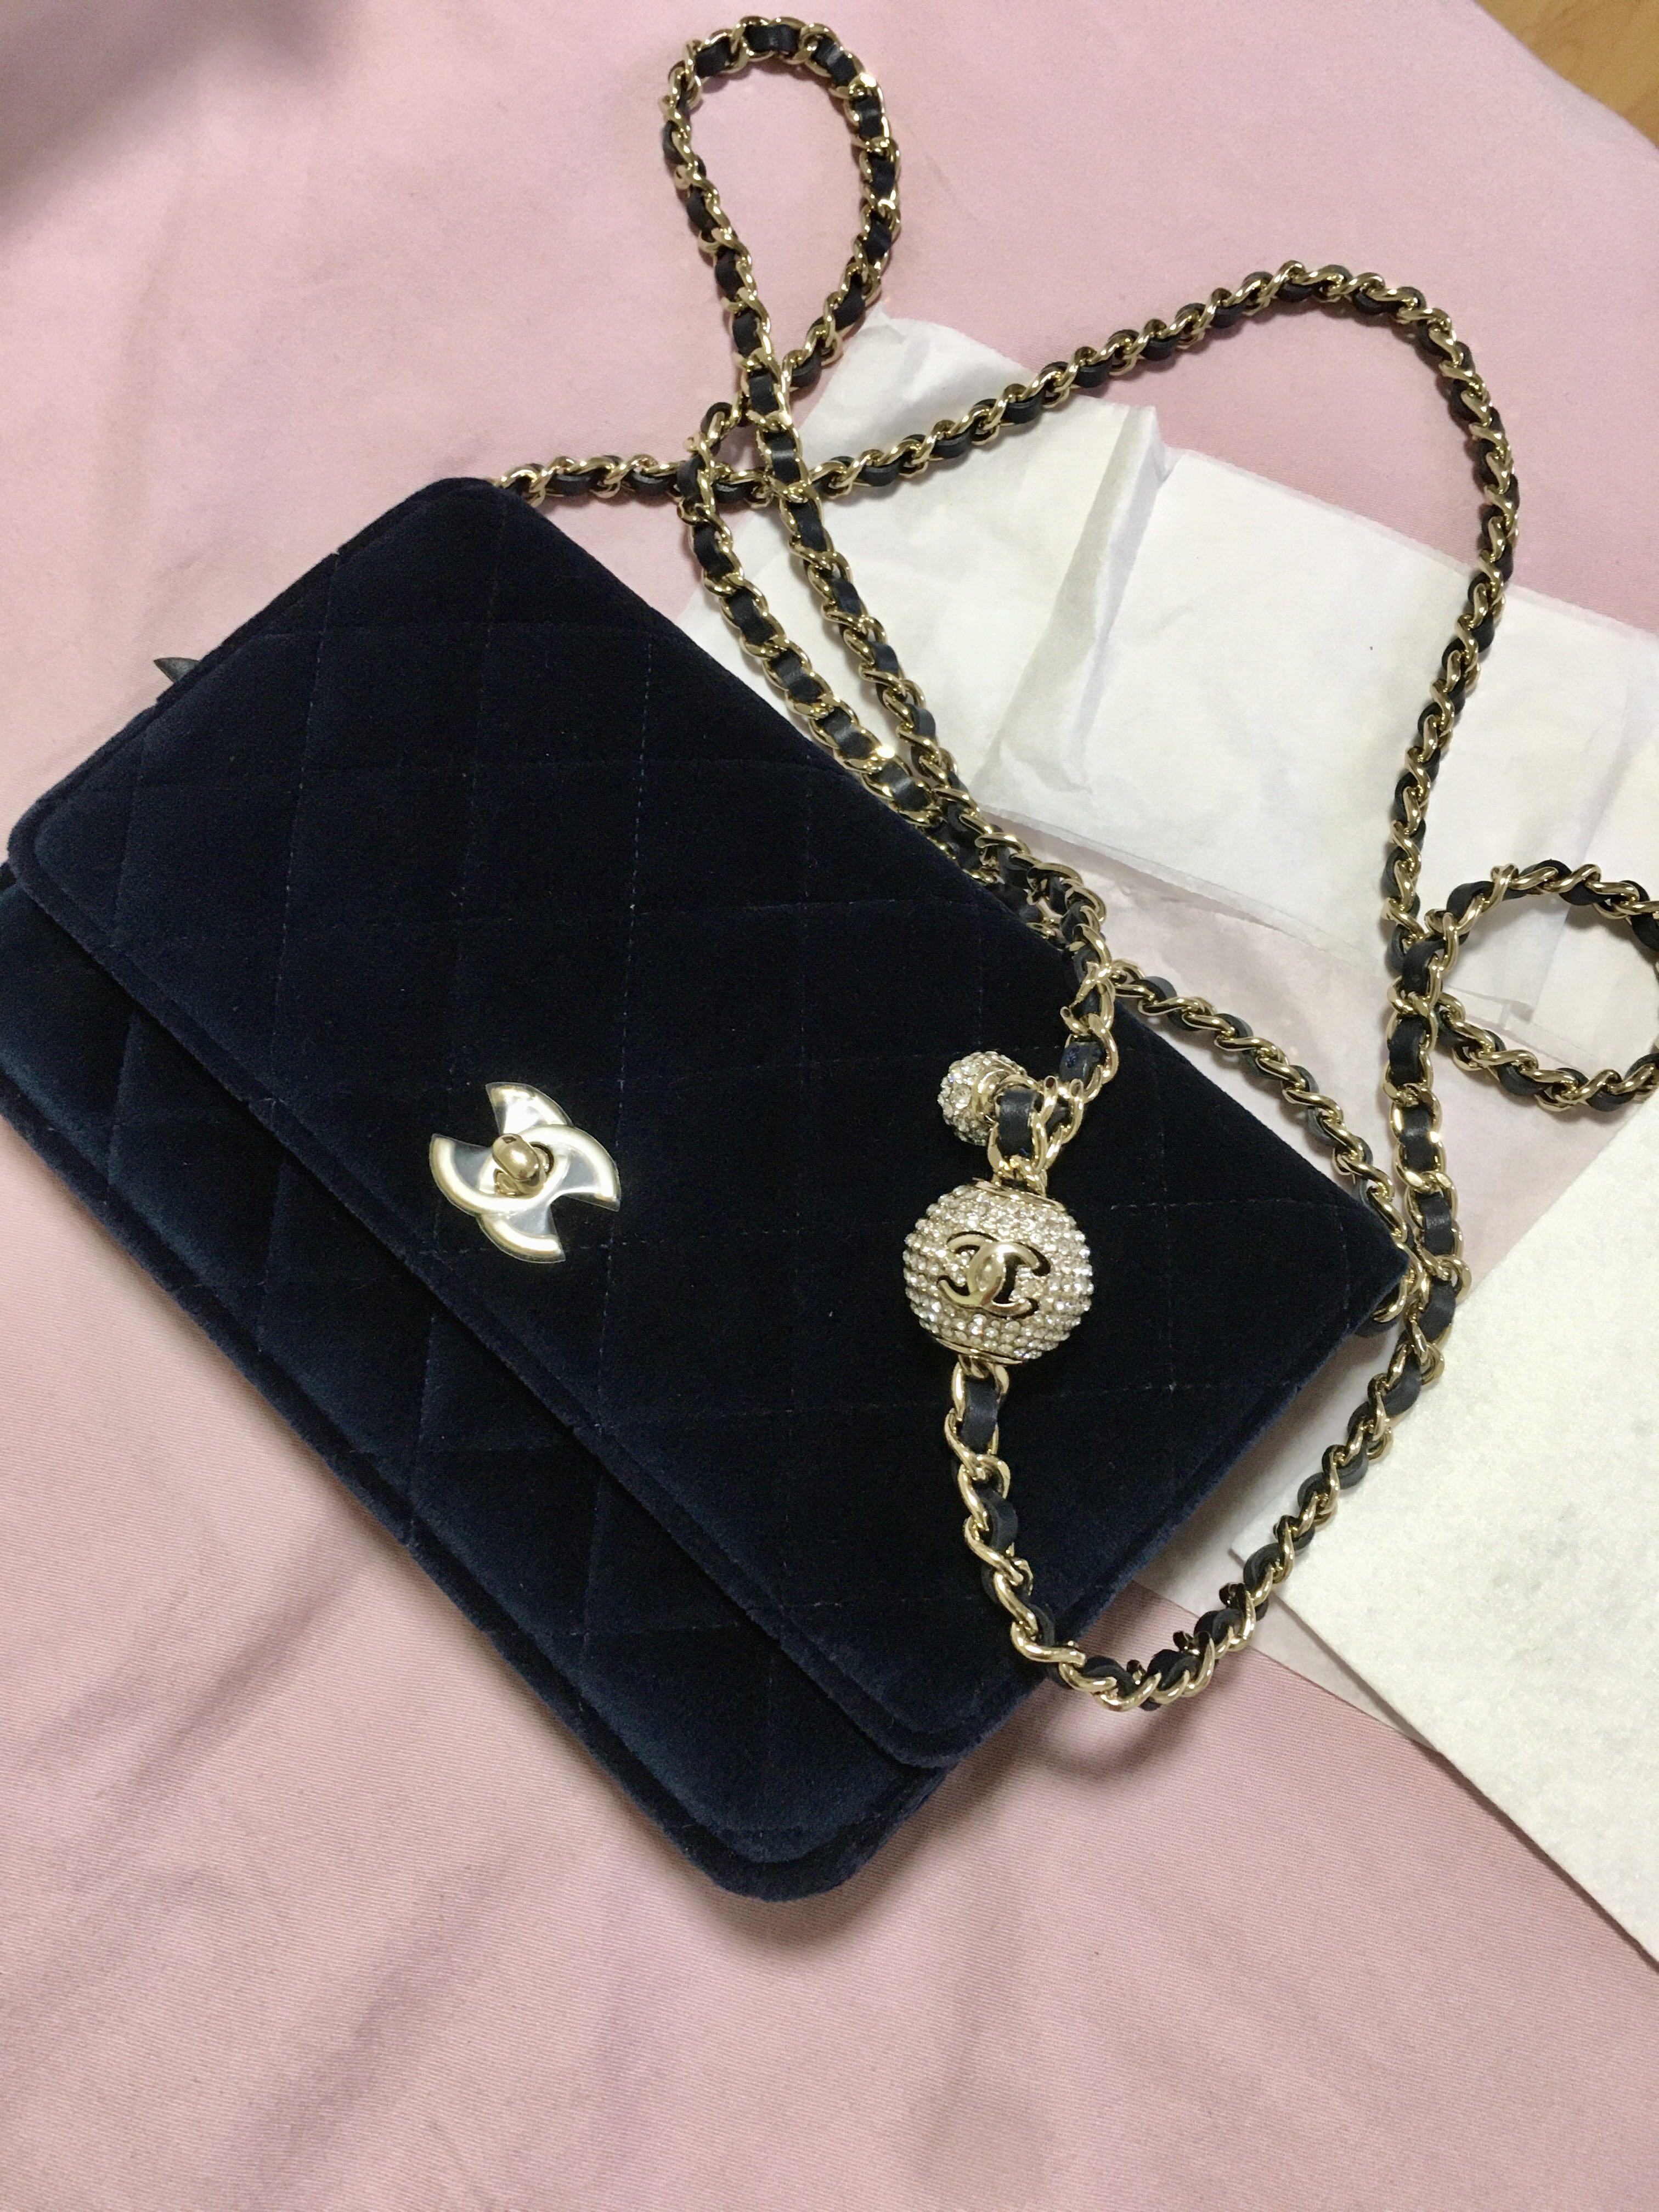 Vintage Chanel Bag, Luxury Chanel Classic Wallet on Chain, Made in France,  Product Code 22180370, Art décor Black WOC, Cult Street Fashion, In-Vogue  Chanel Bag, Model, Movie Star, Catwalk, Runway, Wear on